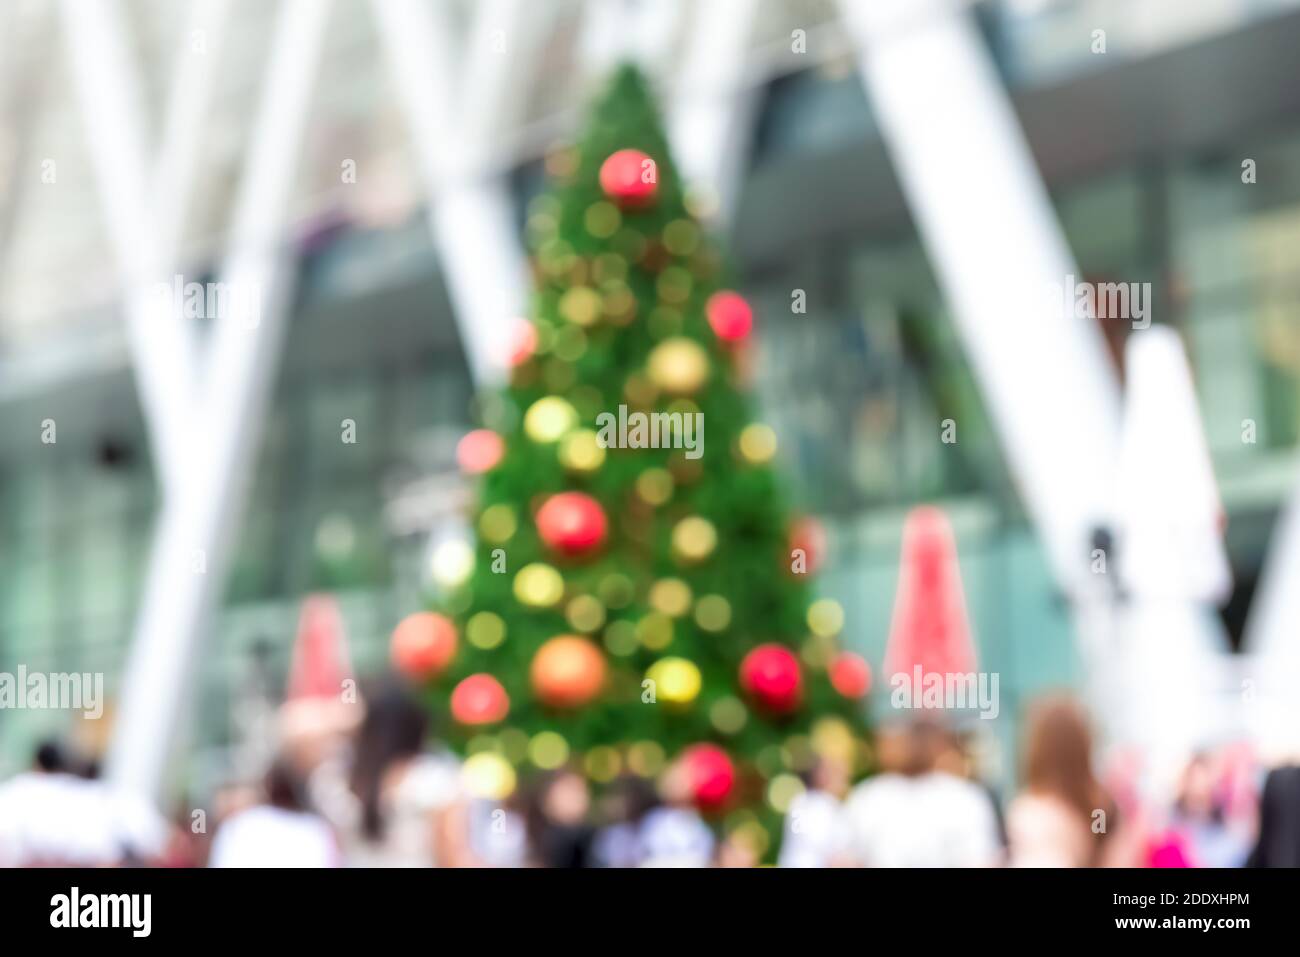 Blurred image of outdoor colorful decorated Christmas tree with people in front of shopping mall in festive season Stock Photo